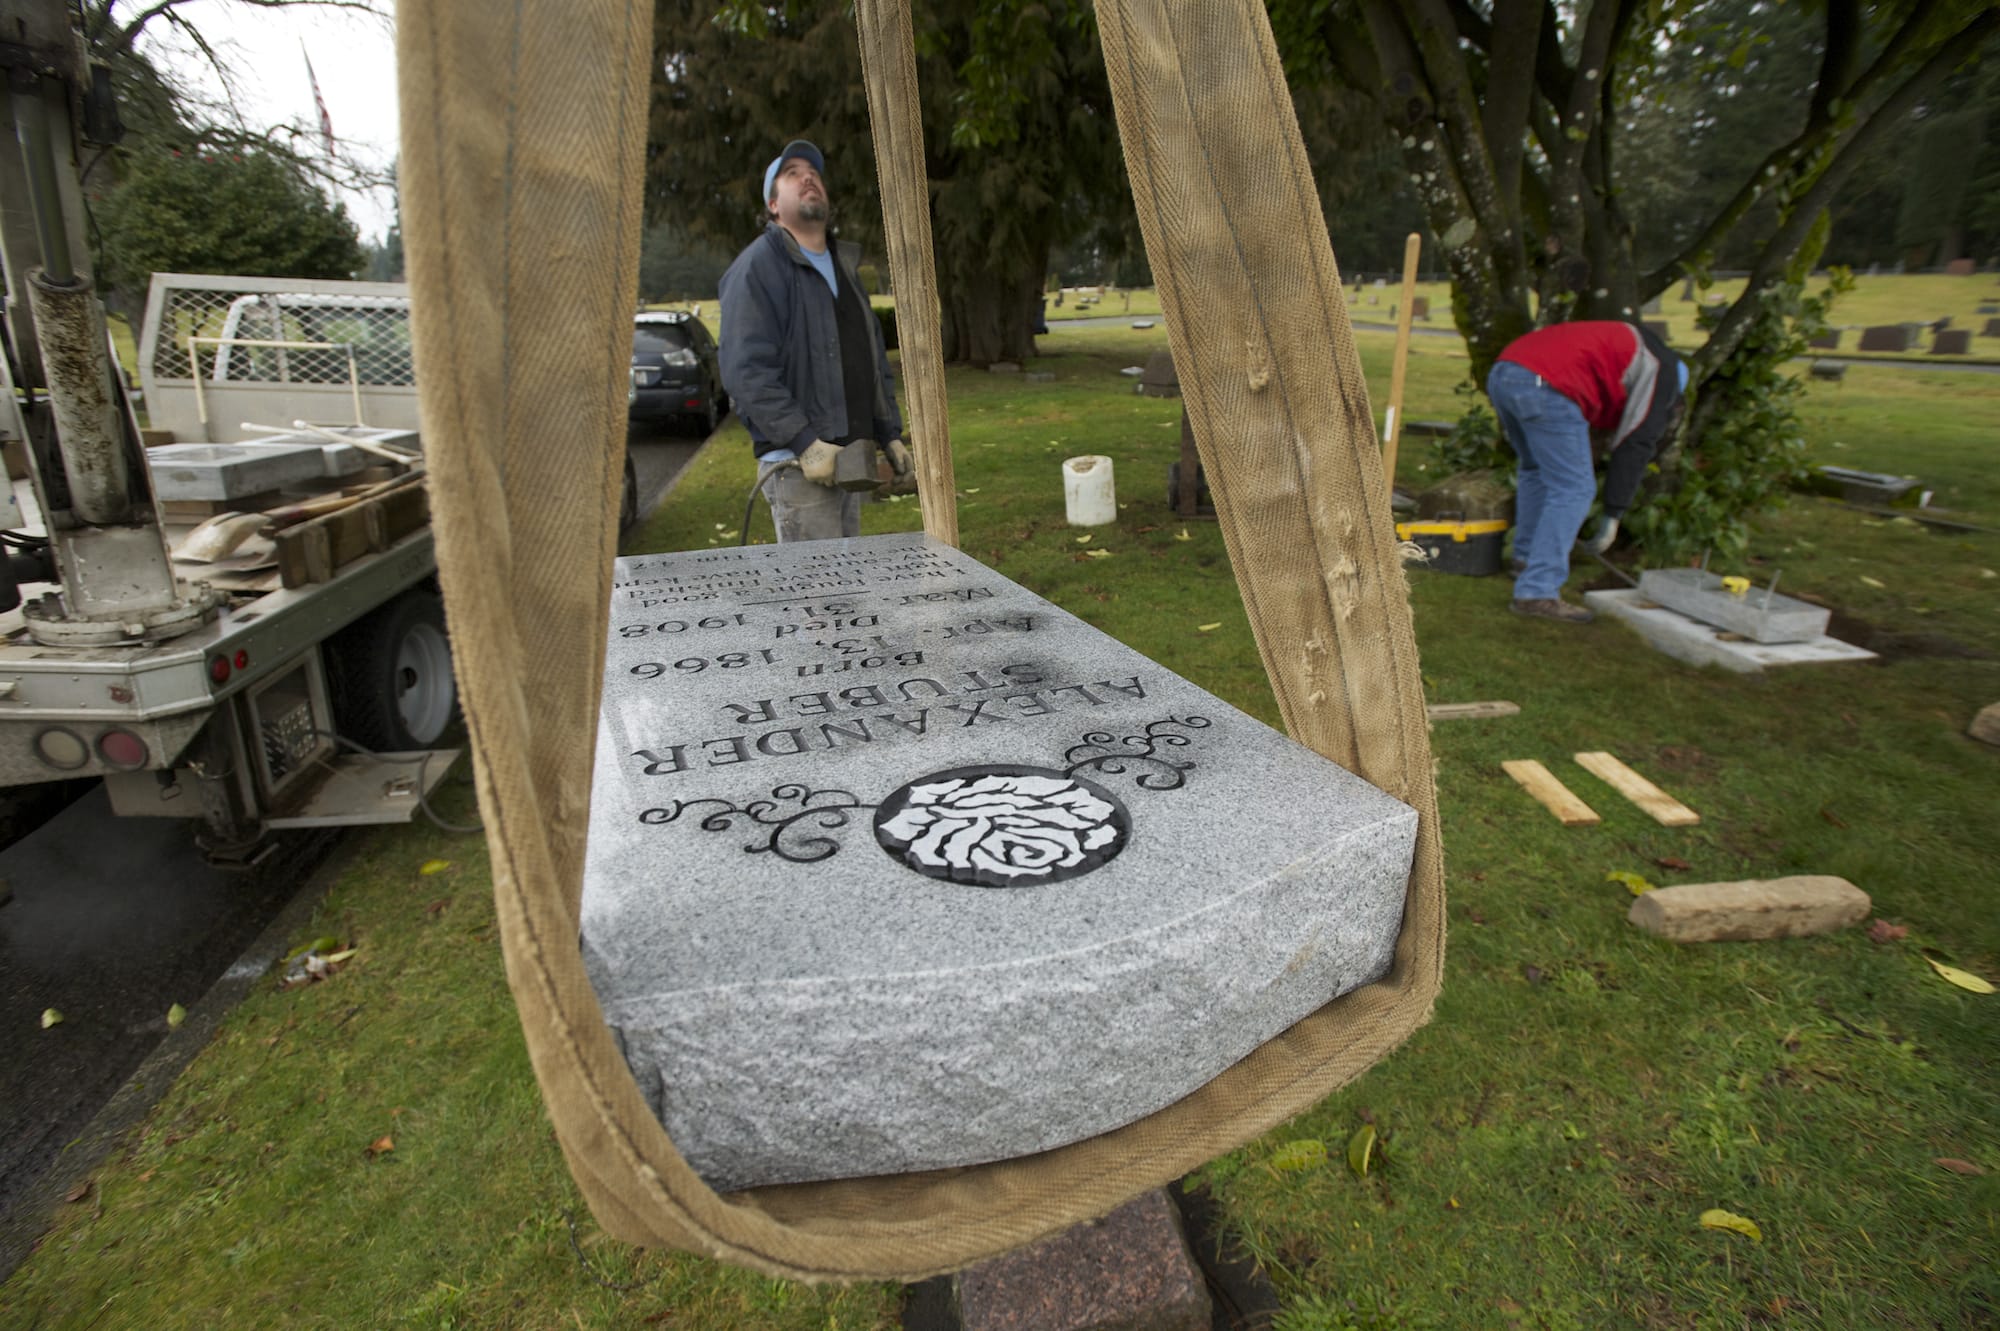 A headstone for Alexander Stuber, who died in 1908, is installed Jan. 31 in Camas Cemetery.